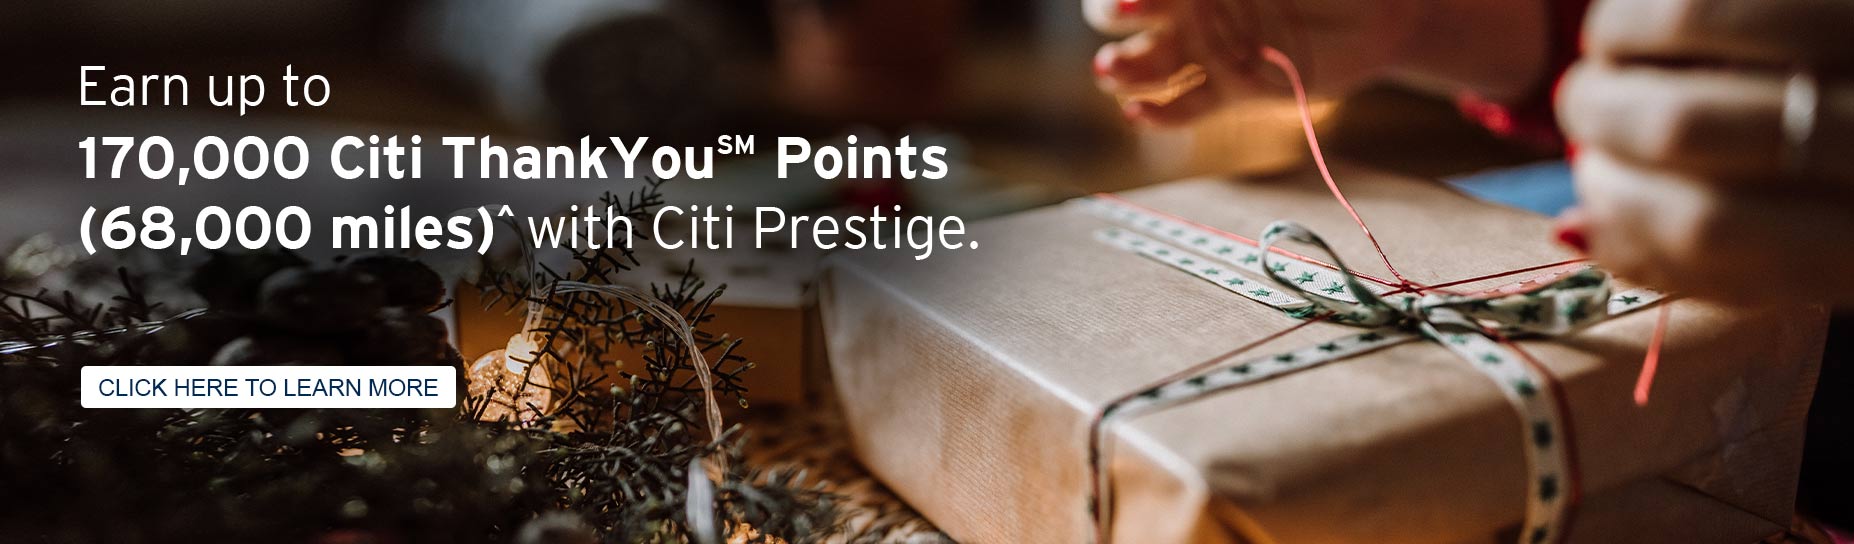 Citi Prestige Card Benefits From travel and security to your rewards.